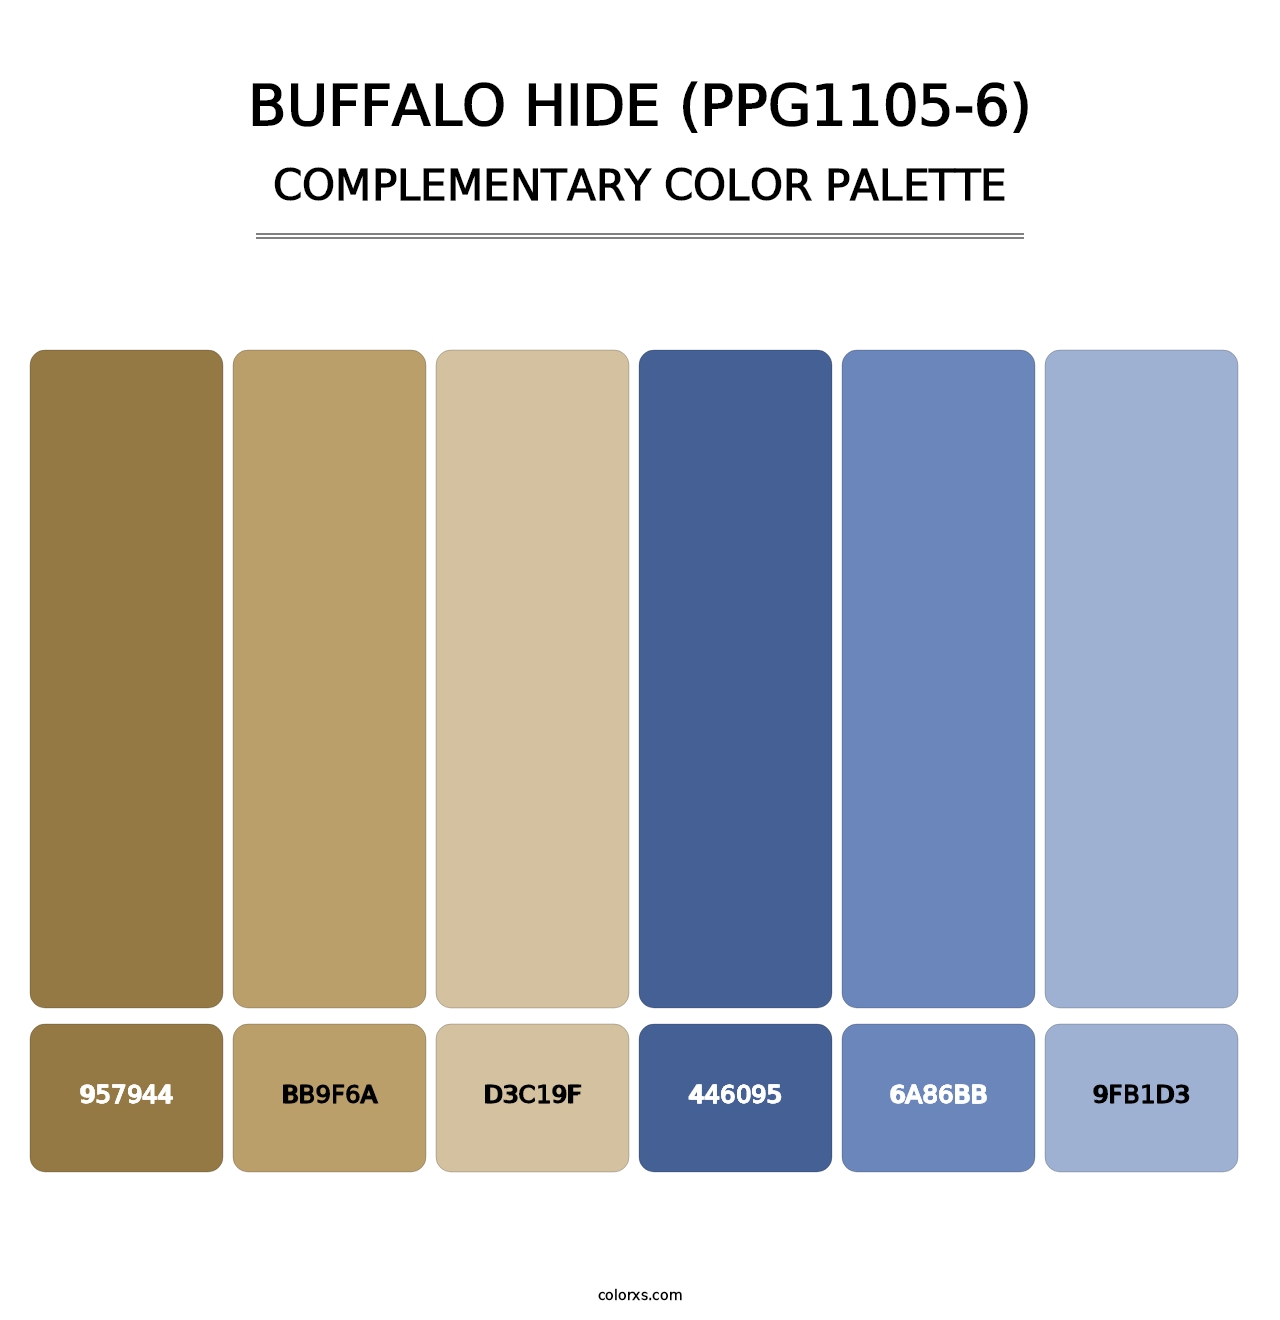 Buffalo Hide (PPG1105-6) - Complementary Color Palette